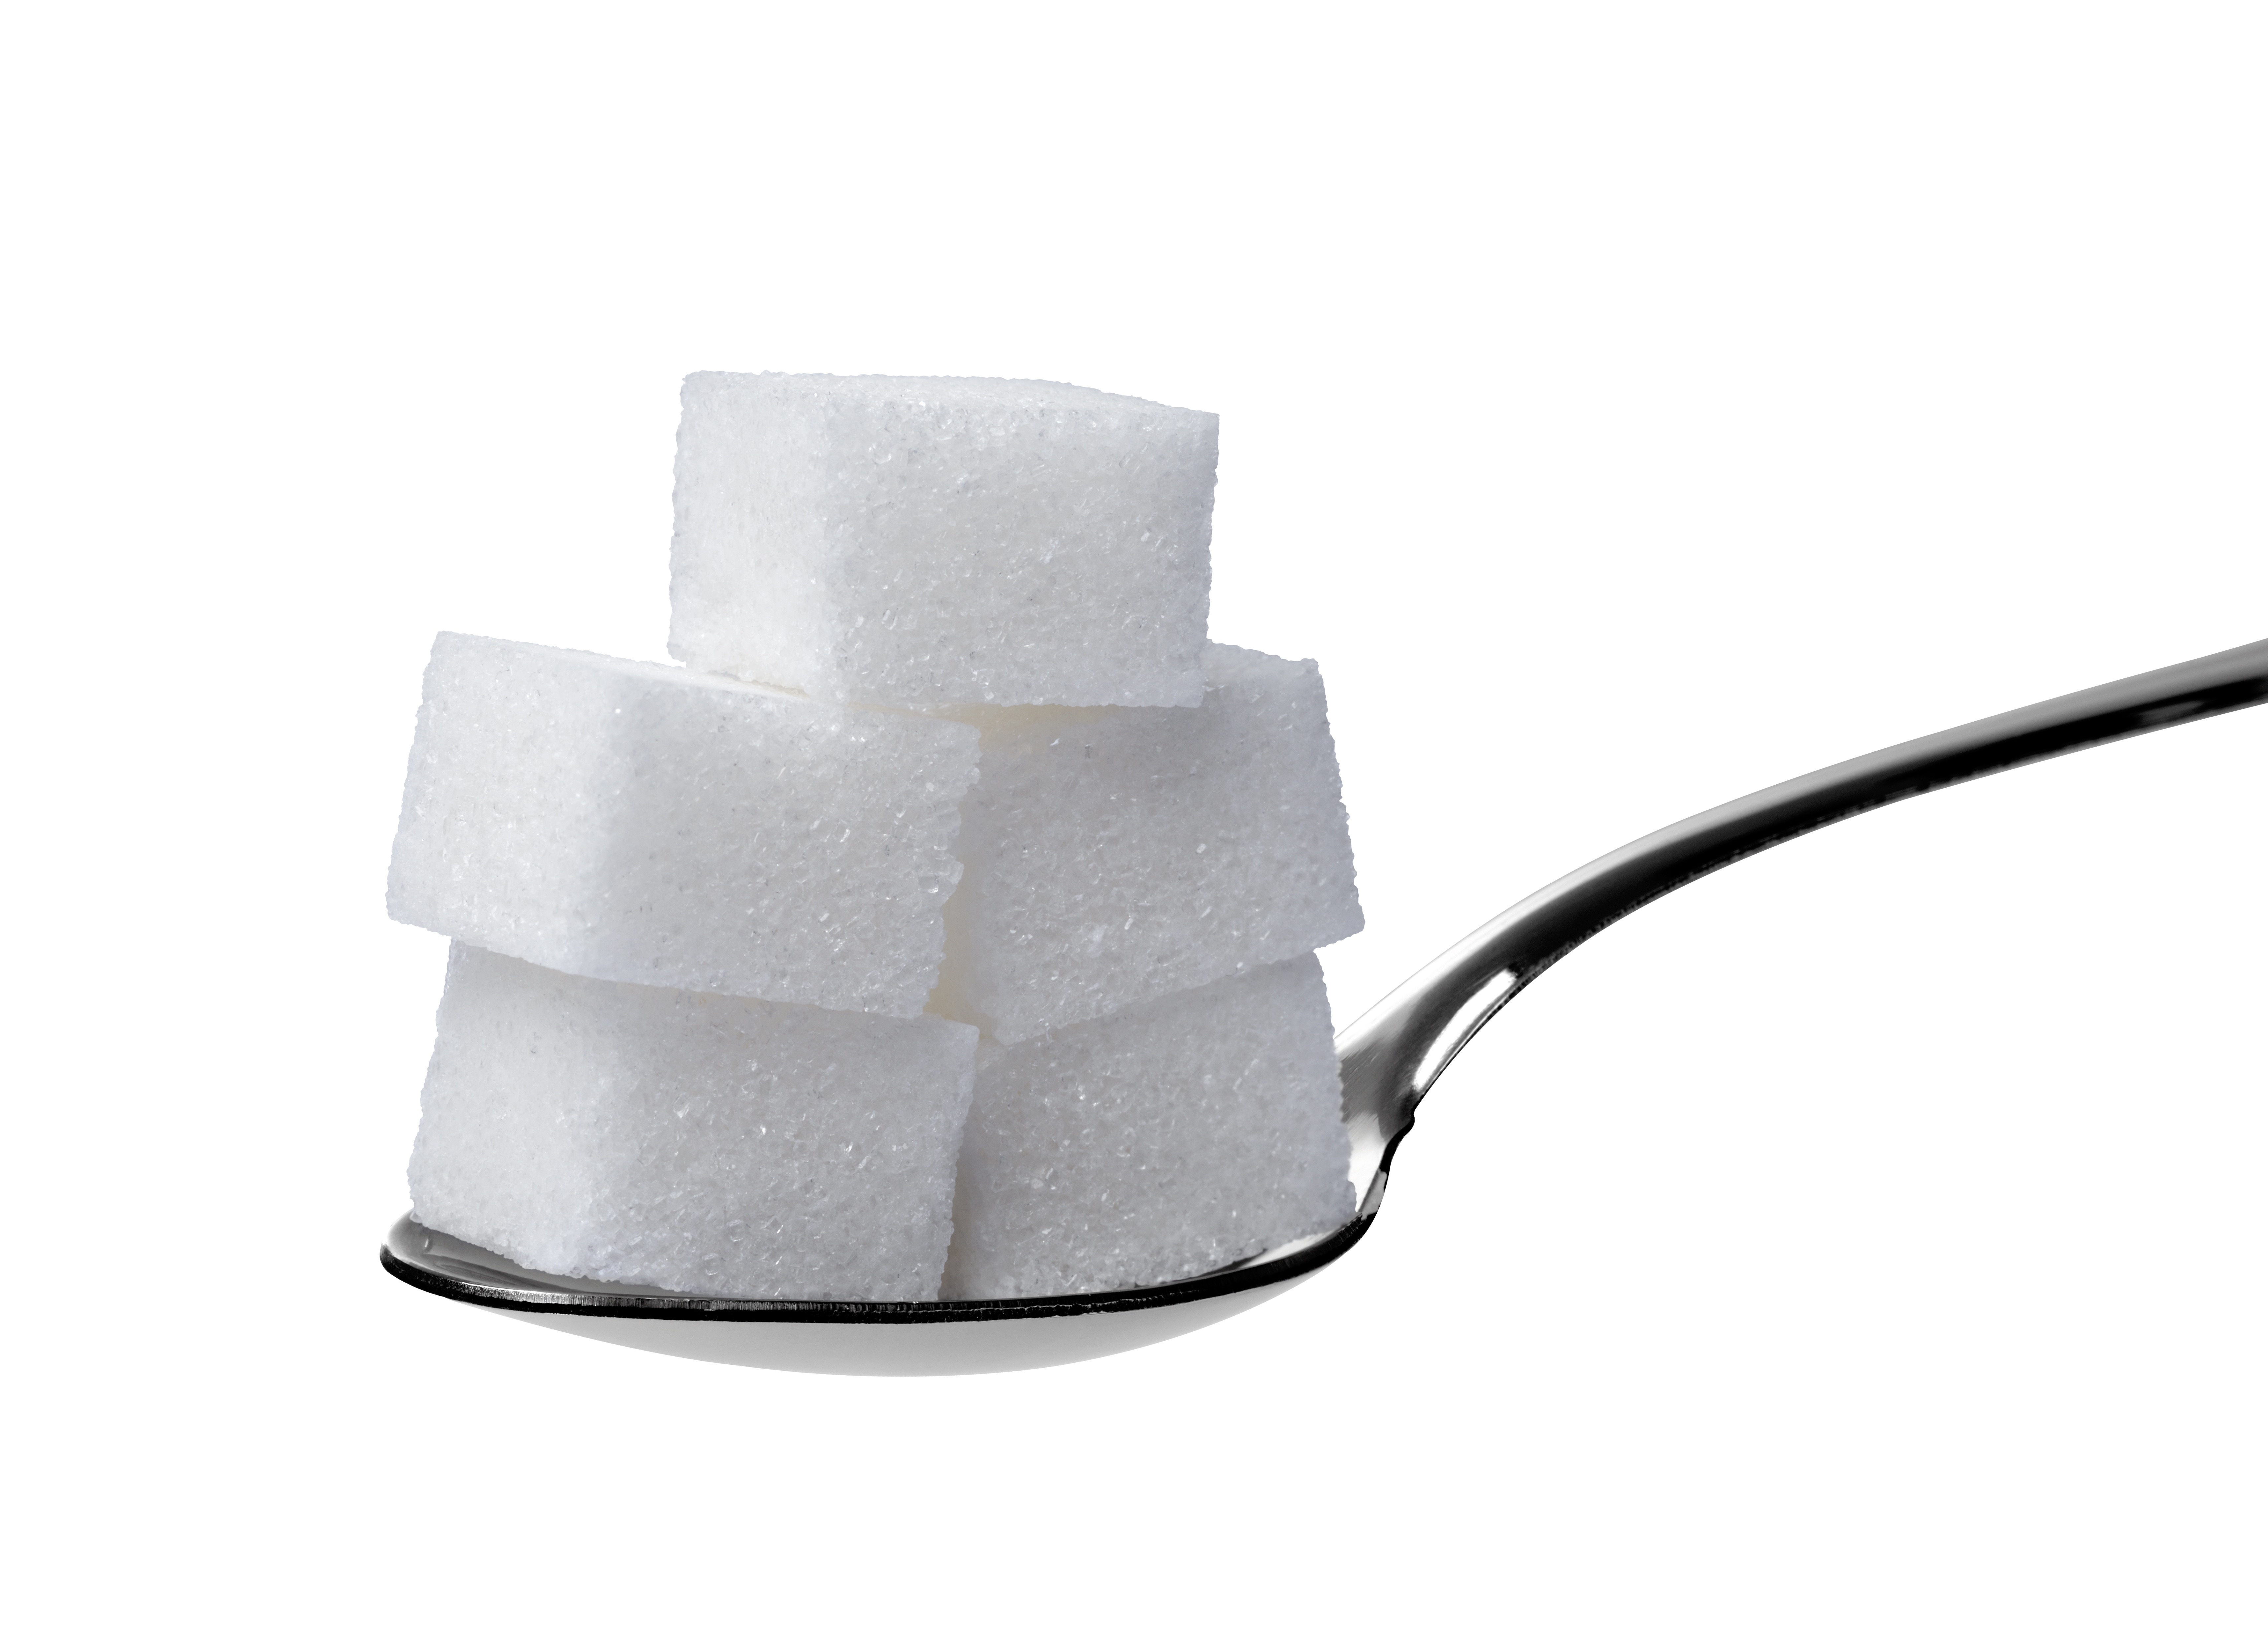 sugar cube and spoon for hypoglycemia